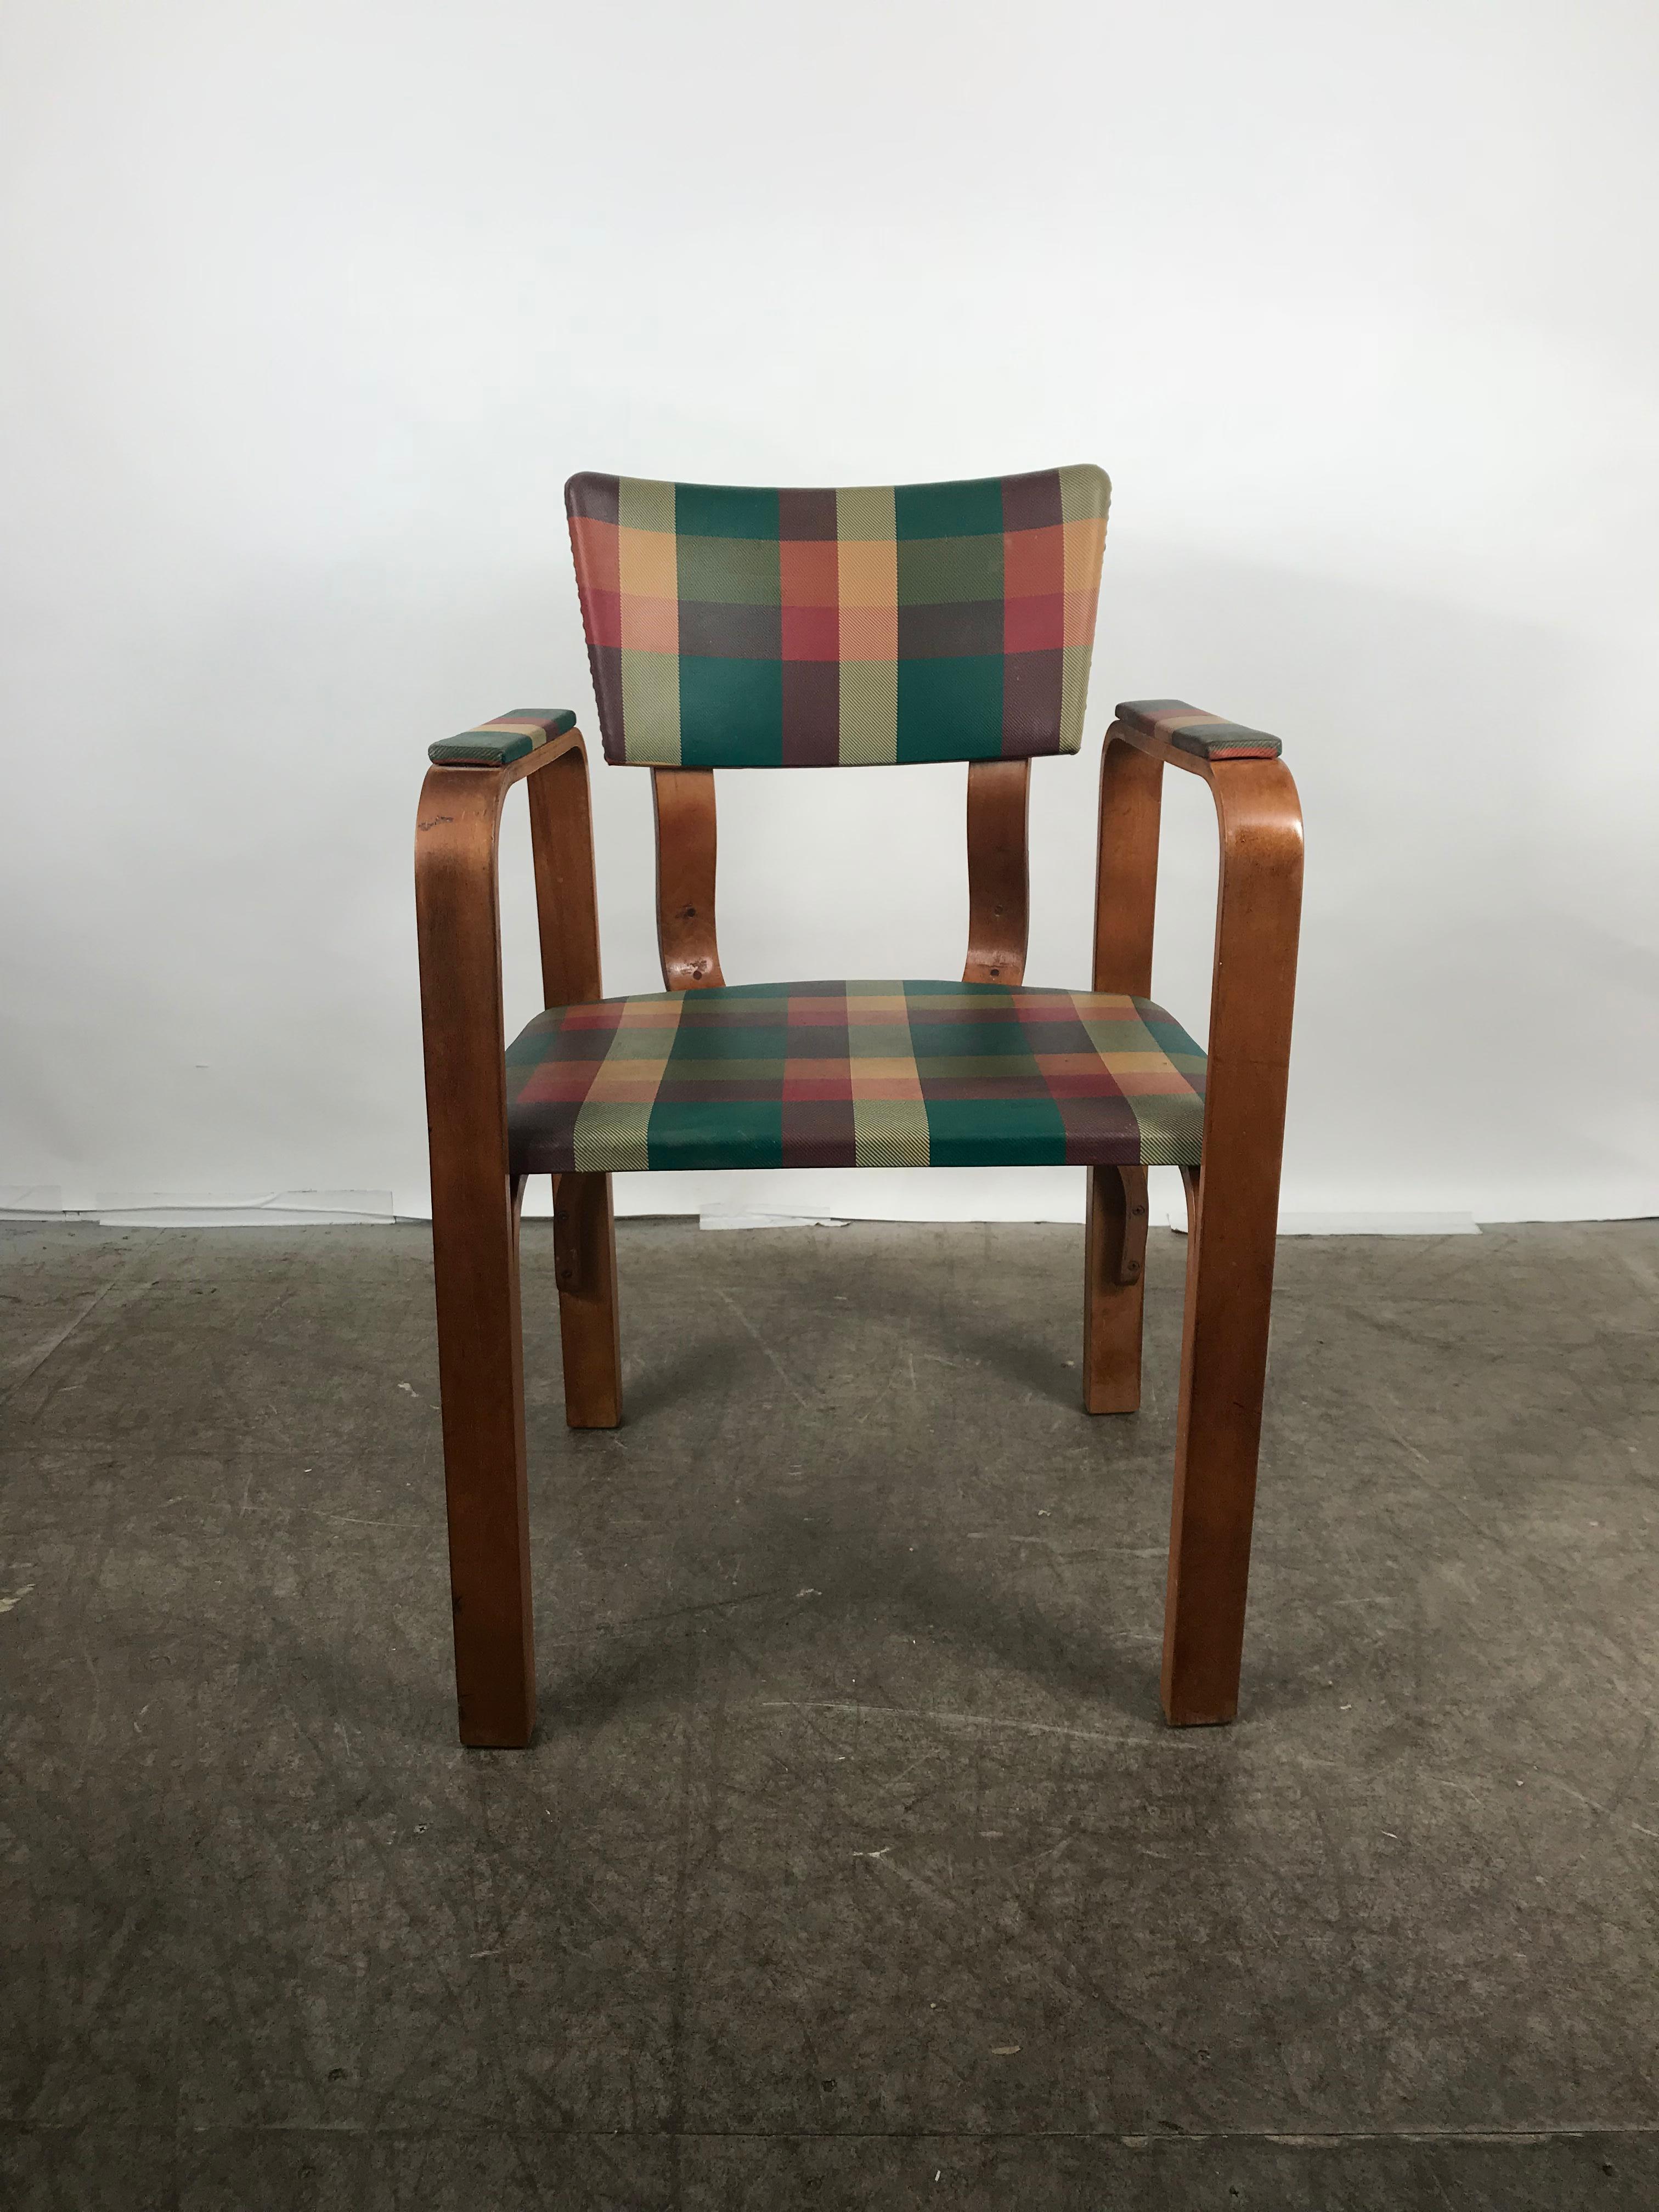 Classic bentwood armchair with original plaid oil cloth by Thonet brothers 1940s, extremely comfortable, chair in remarkable original condition, minor discoloration to plaid. Retains original Thonet label, arm height 27 inches.